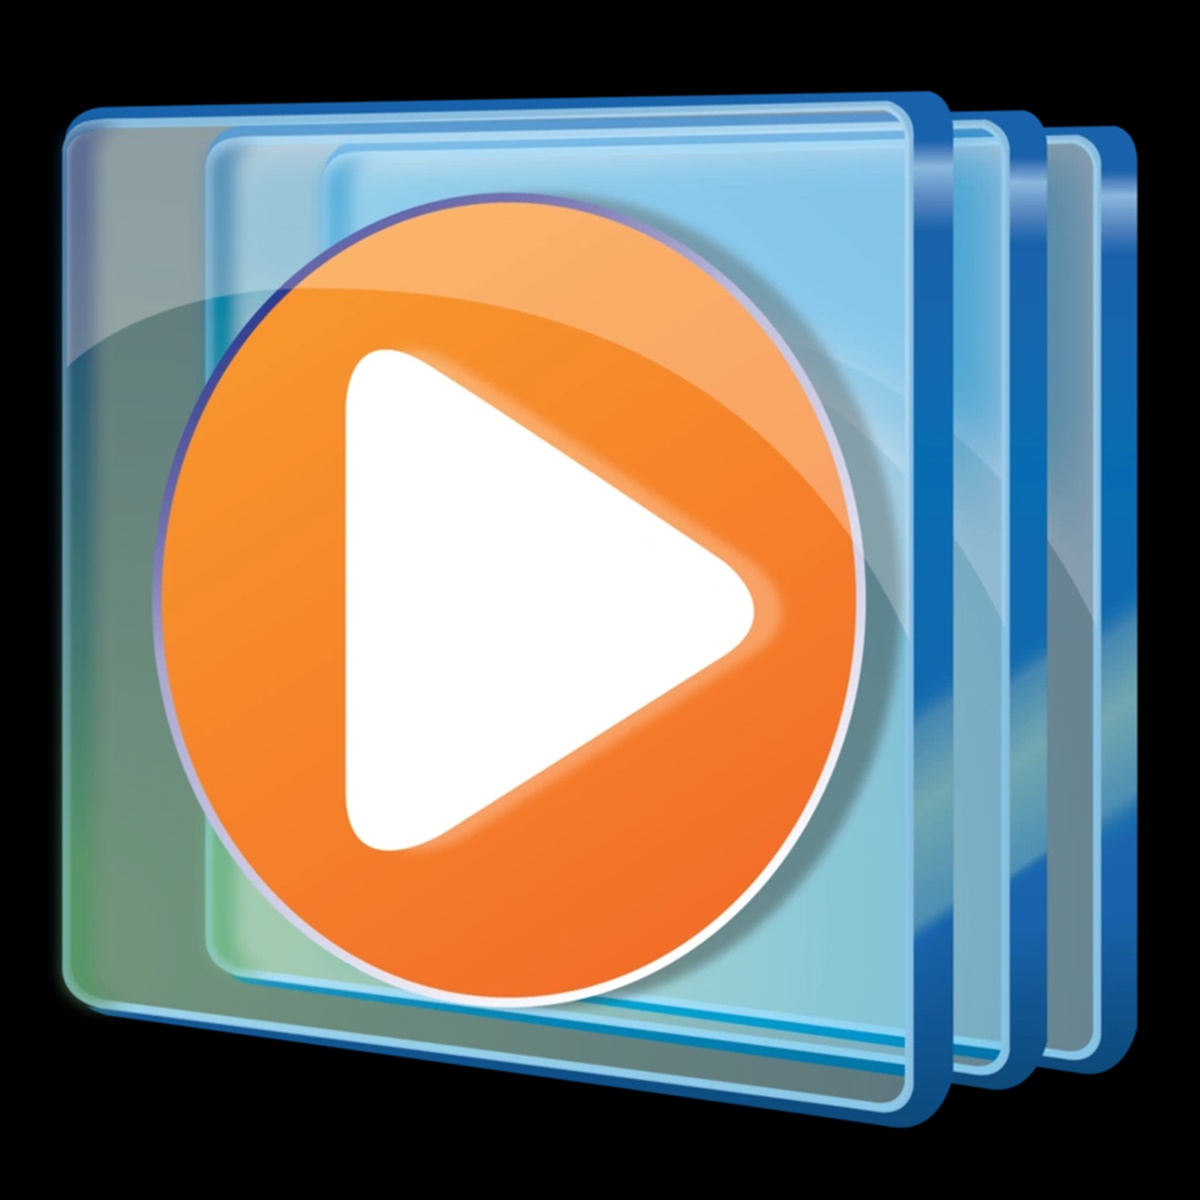 Free Programs That Can Replace Windows Media Player